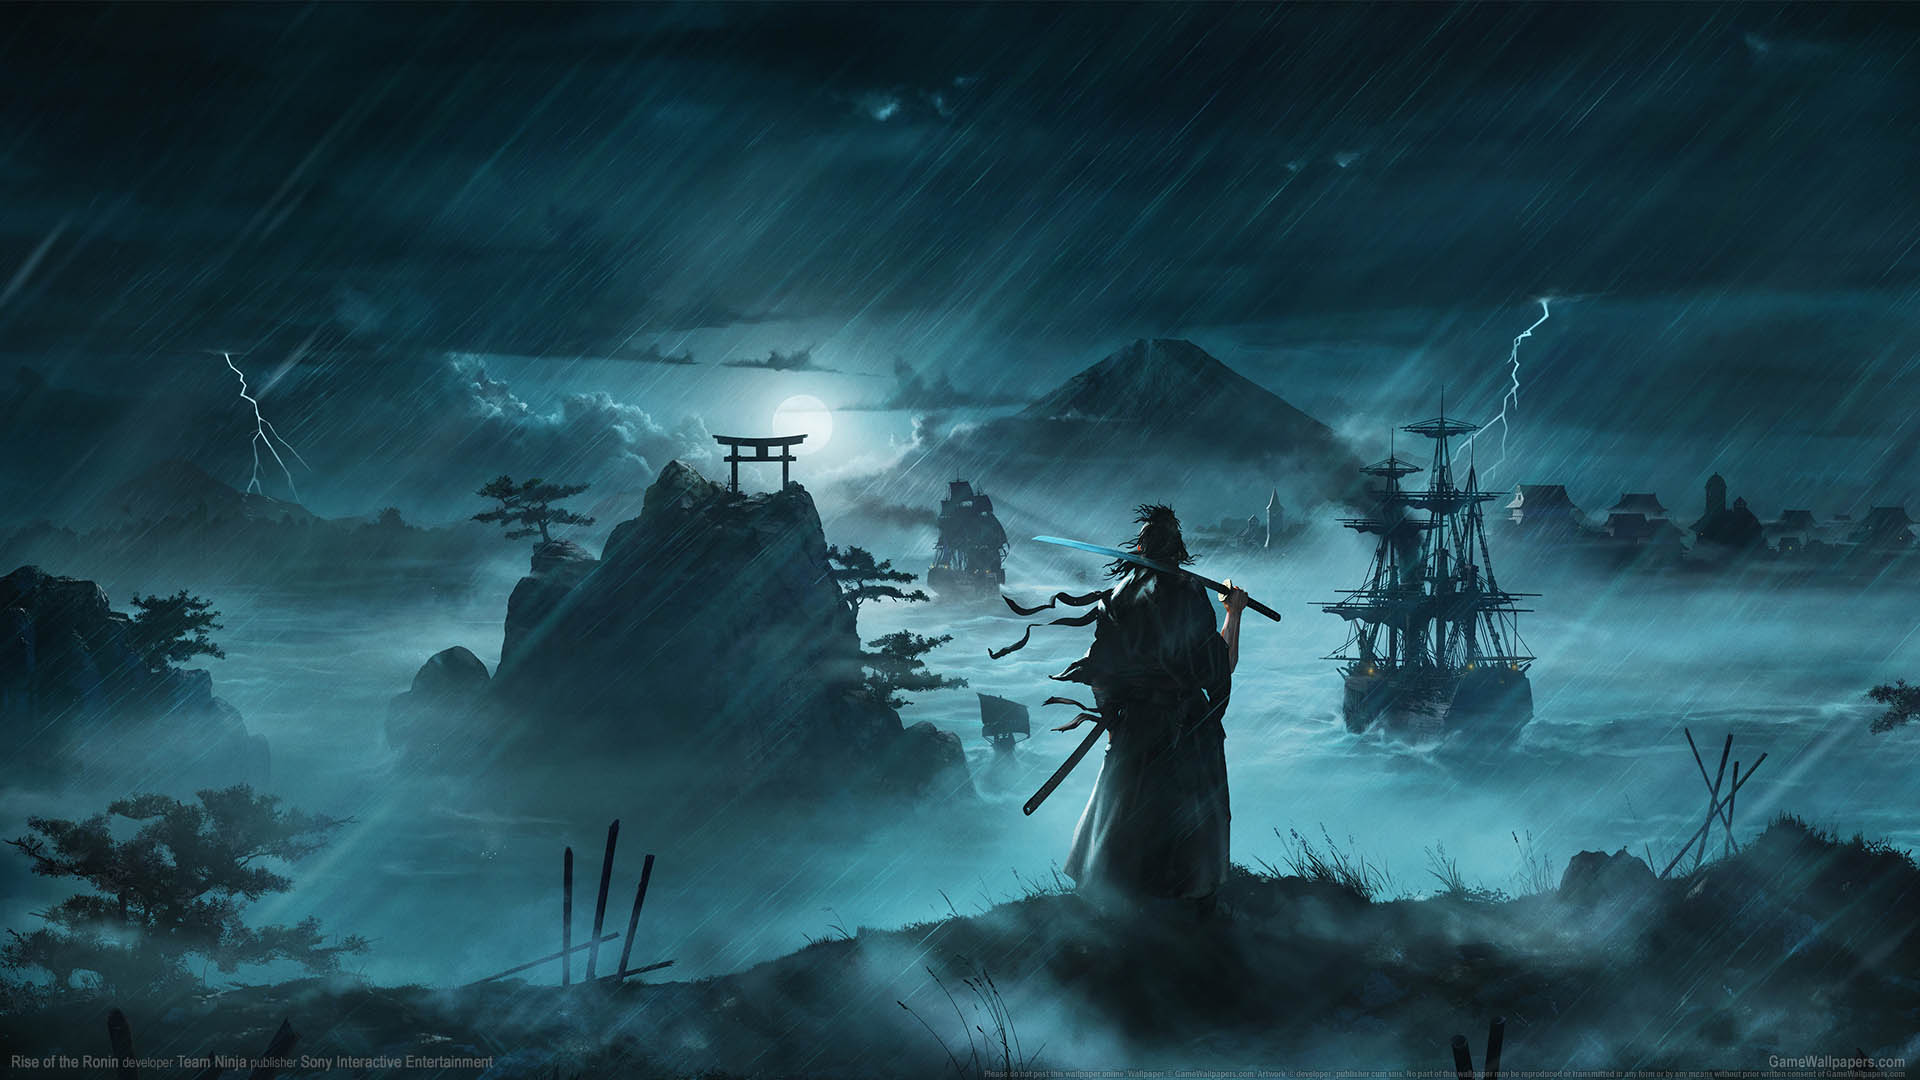 Rise of the Ronin achtergrond 01 1920x1080